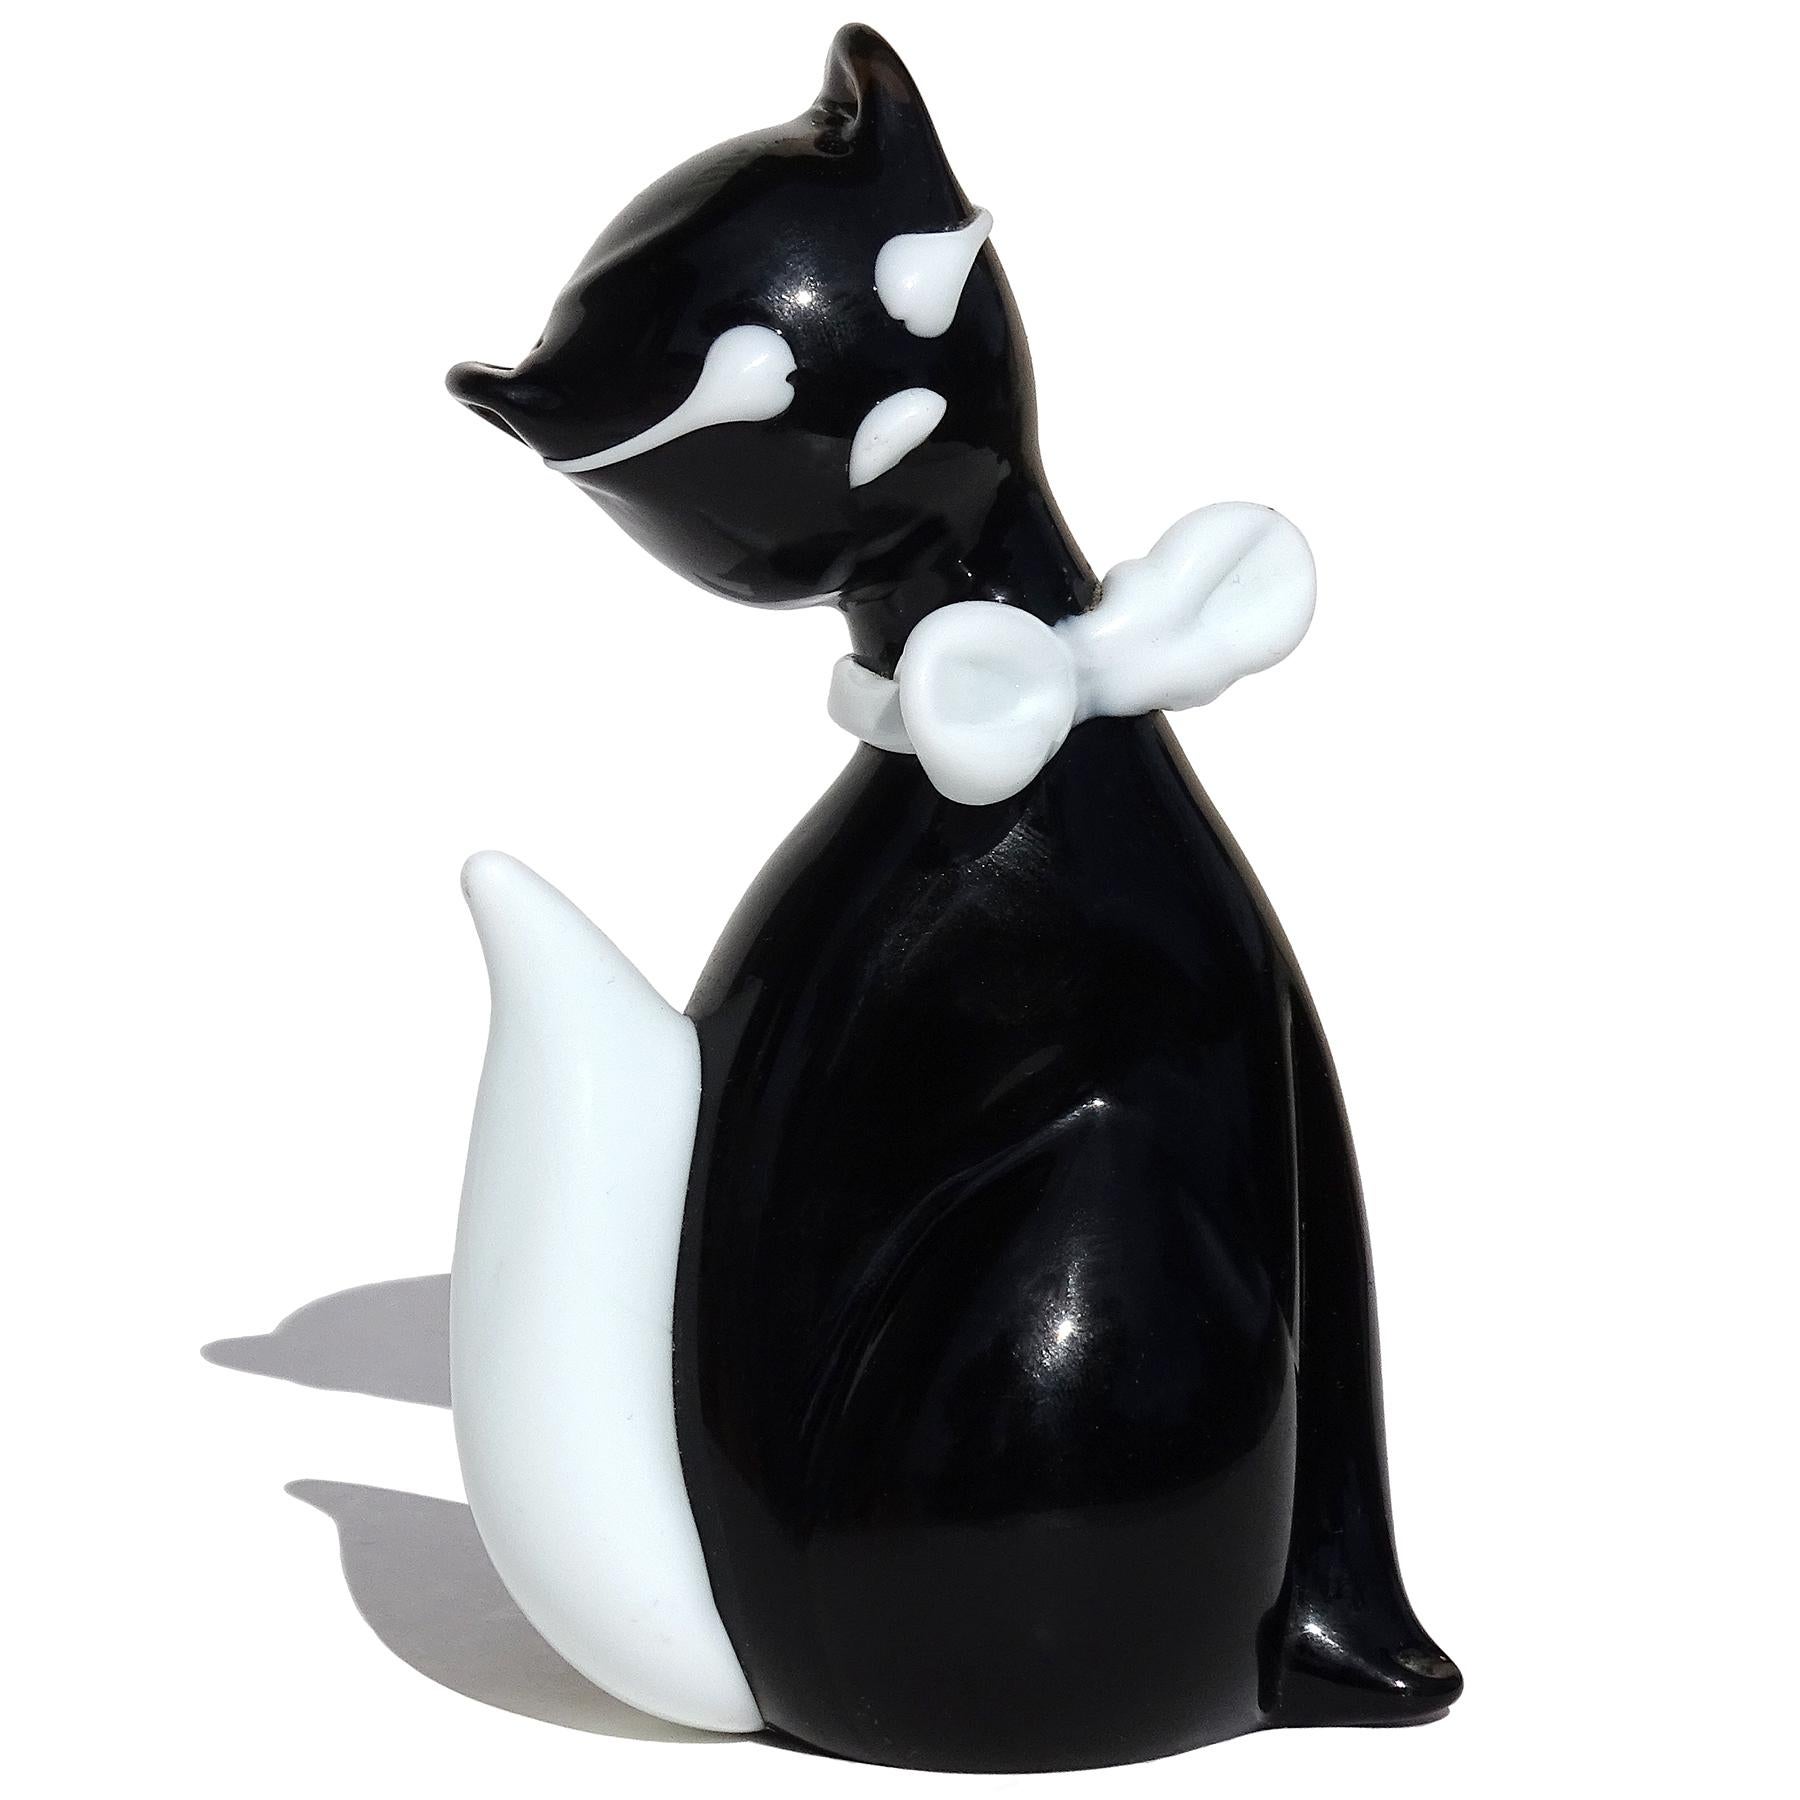 Beautiful vintage ICET Arte Murano hand blown deep black with white accents abstract shape tuxedo kitty cat figurine, sculpture. The piece has an original 